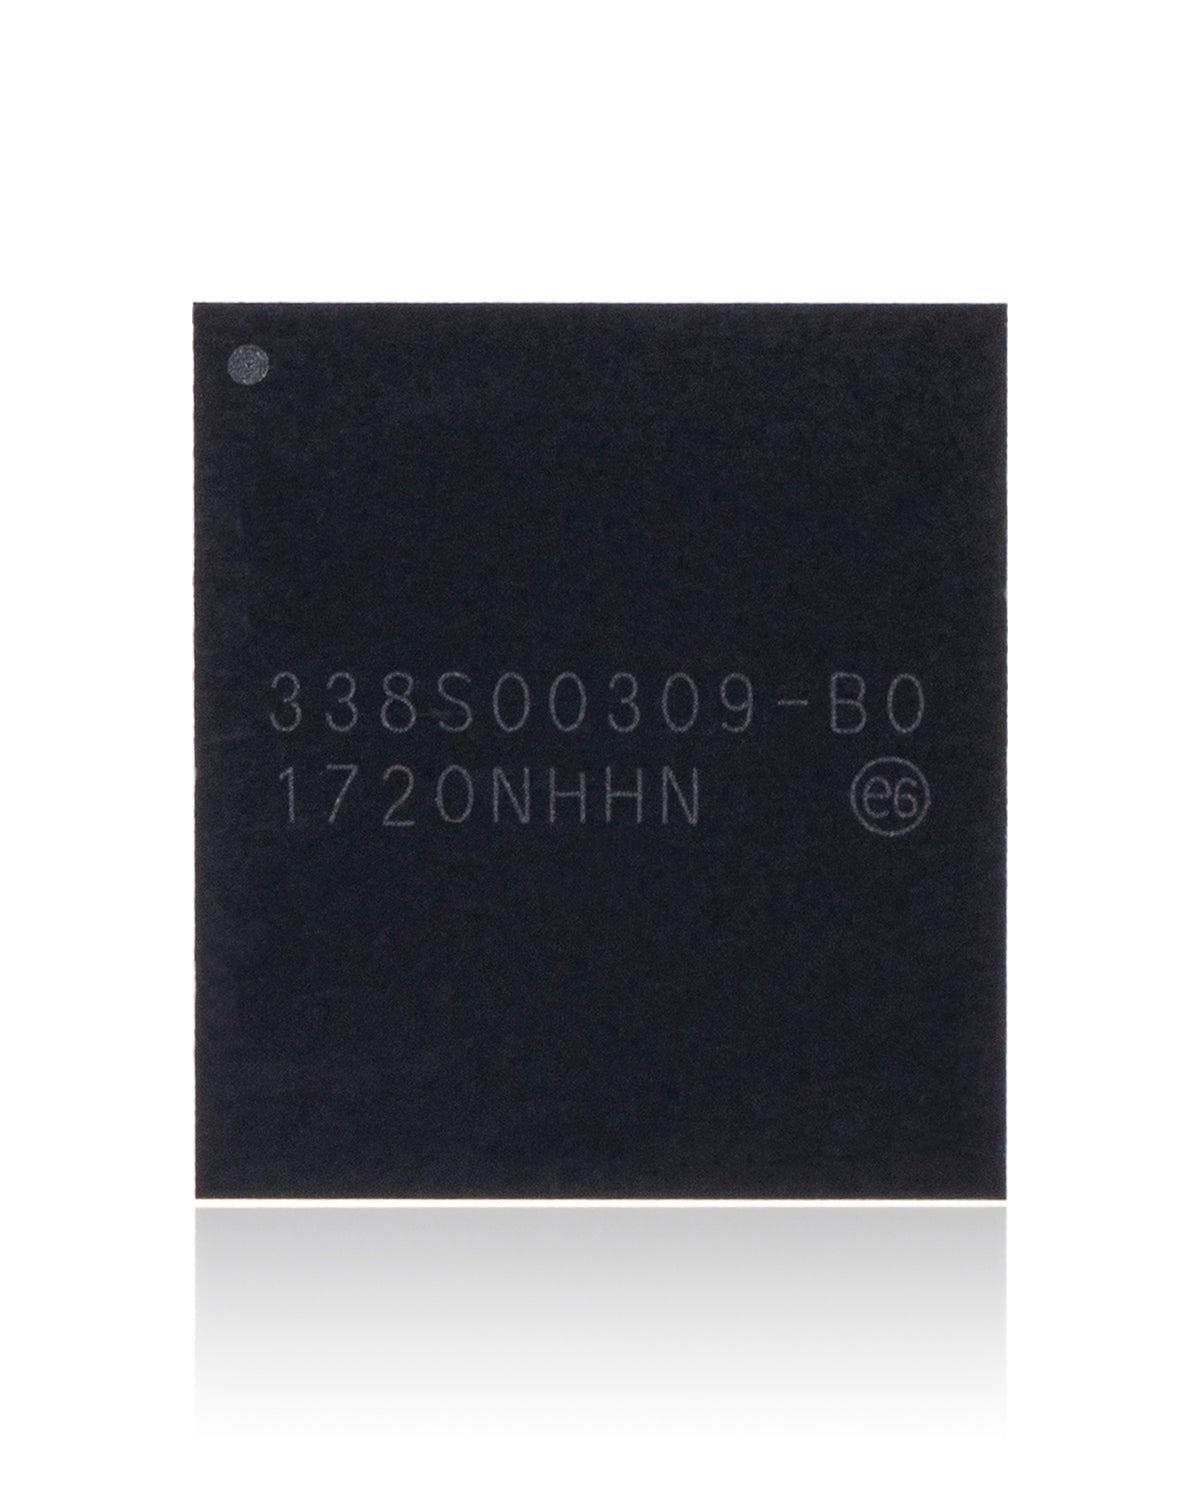 POWER MANAGEMENT PMIC IC (BIG) COMPATIBLE WITH IPHONE 8 / IPHONE 8 PLUS / X PMIC (U2700 / 338S00309)